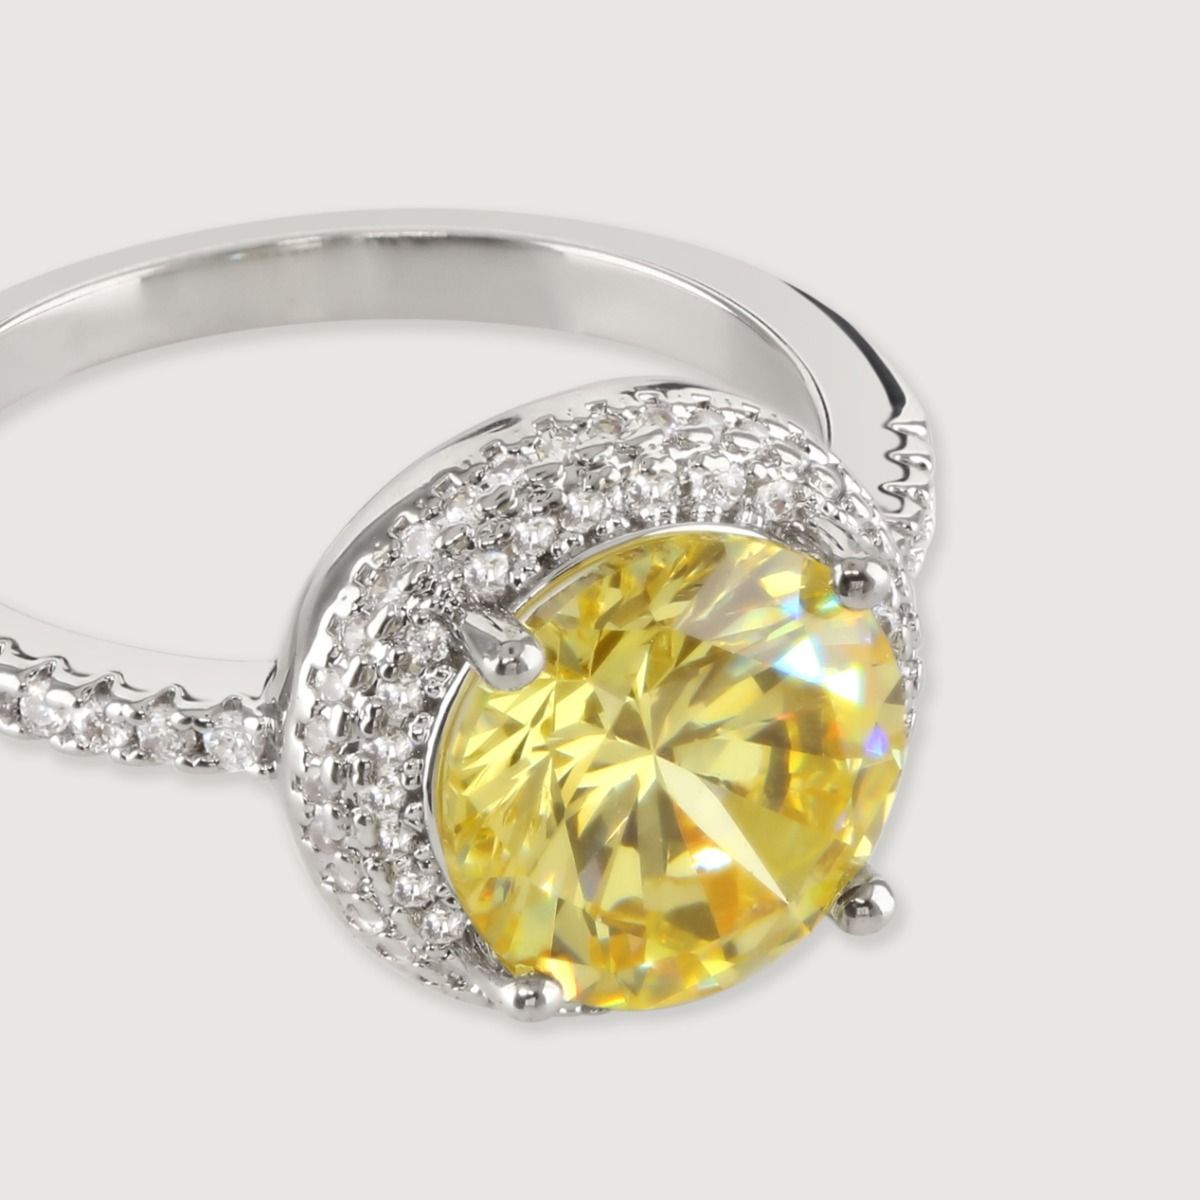 Make a statement with this stunning brilliant cut canary ring. Delicately surrounded with a double halo of sparkling cubic zirconia stones surrounding the centre stone and down the band, creating a dramatic, elegant look.